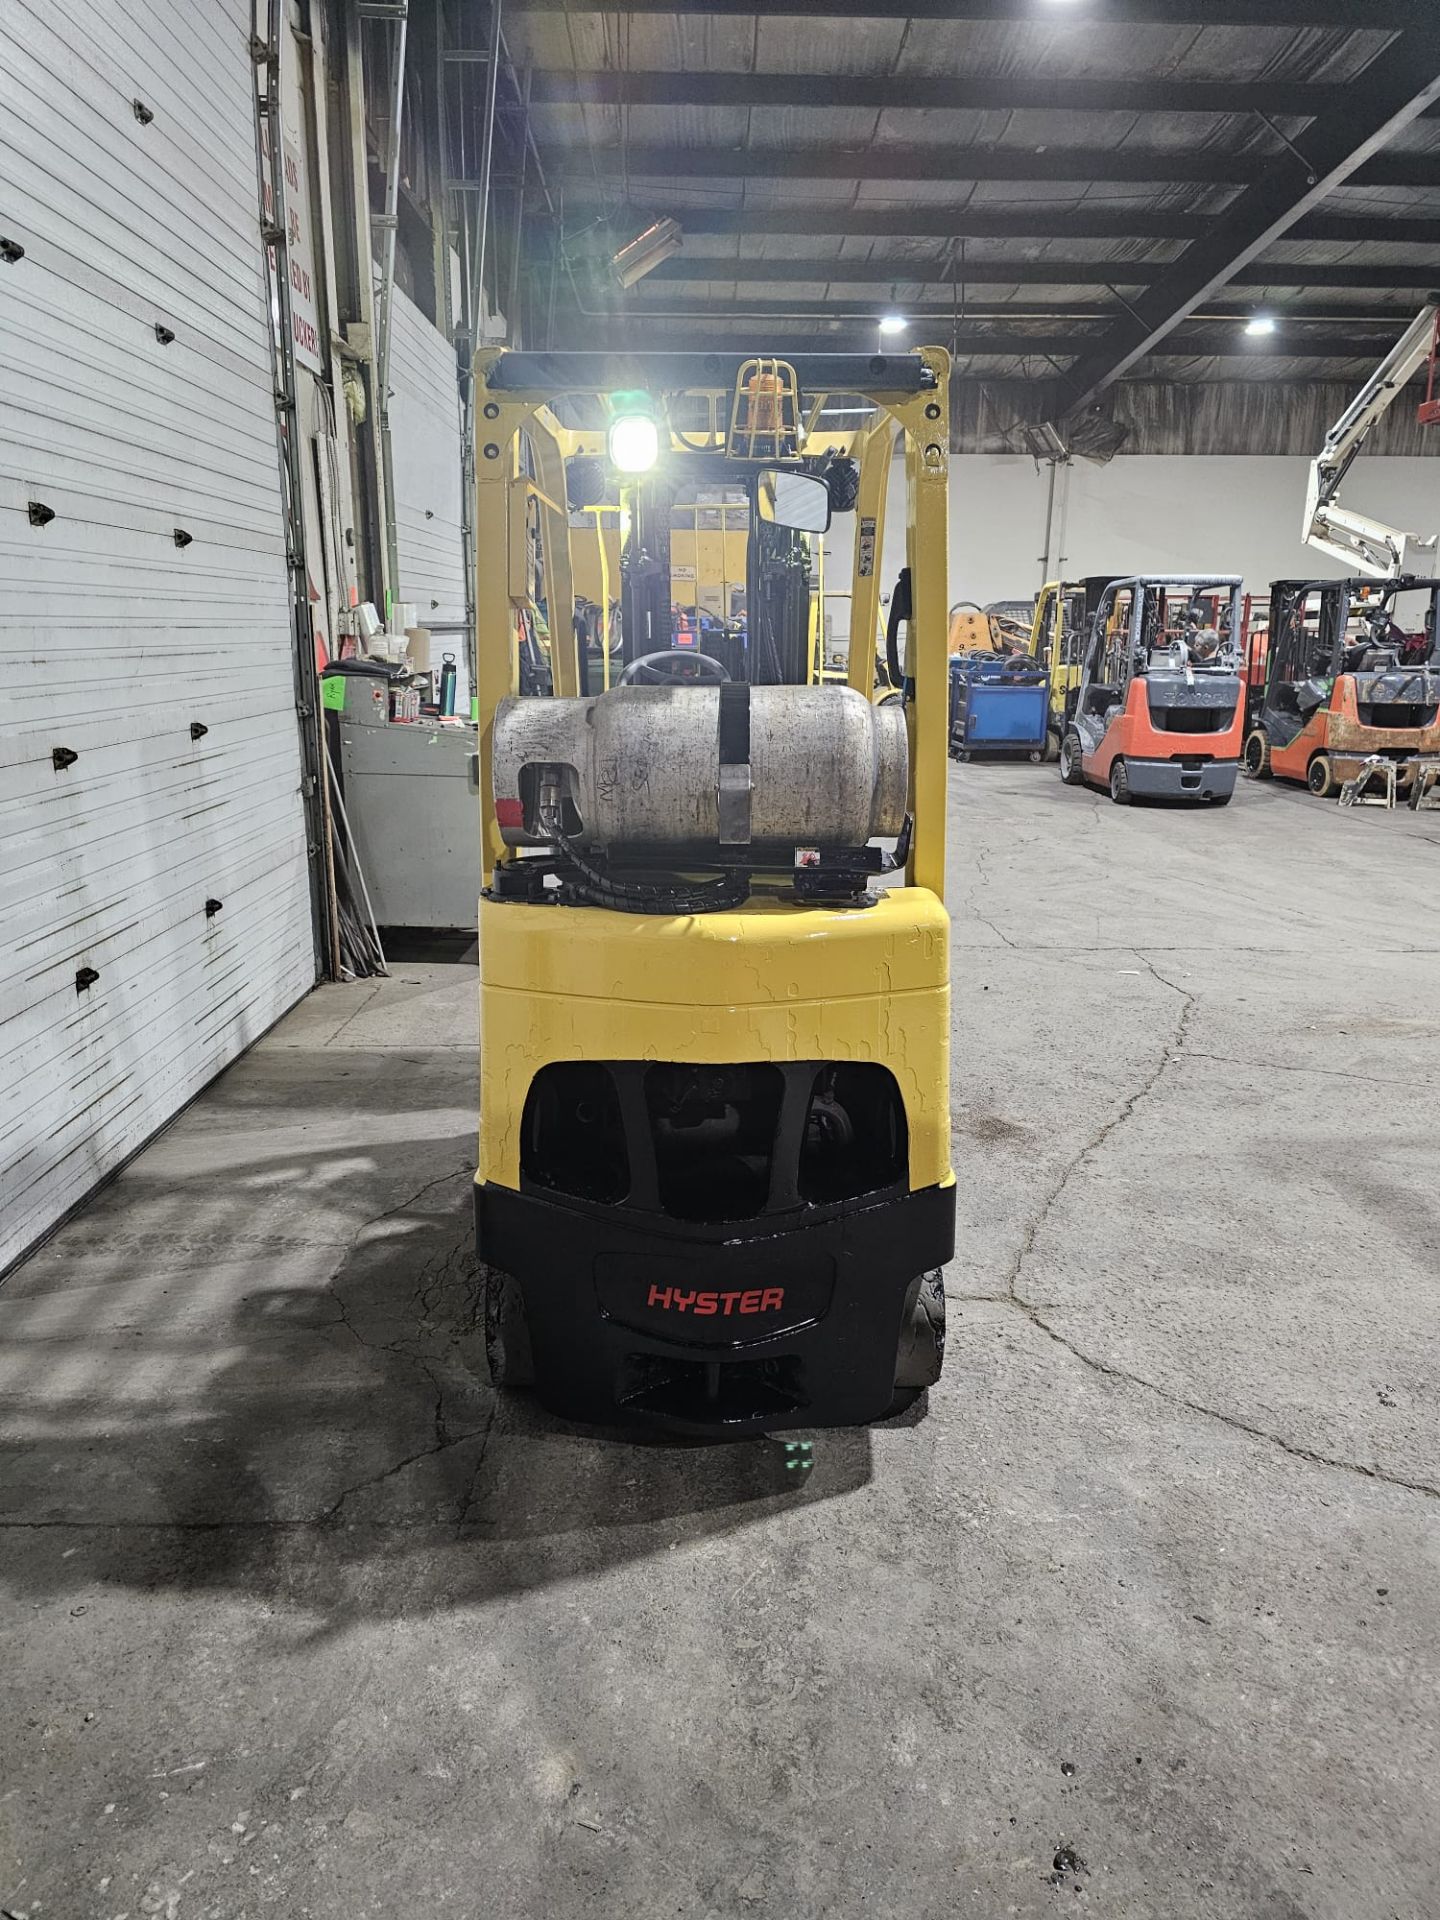 2015 Hyster 4,000lbs Capacity LPG (Propane) Forklift with sideshift and 3-STAGE MAST (no propane - Image 4 of 5